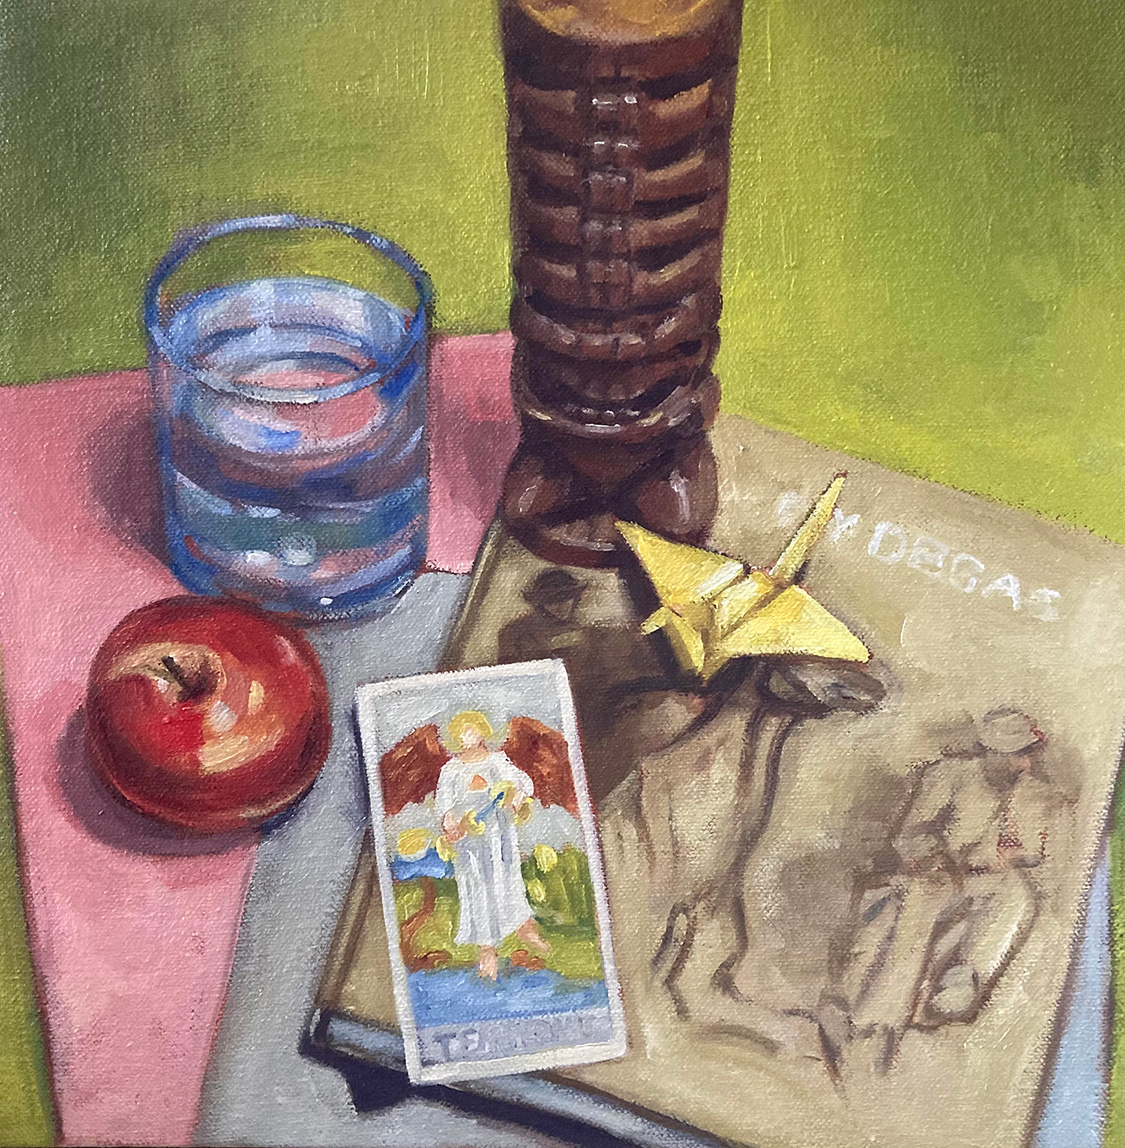 Oil painting still life of a book, the Temperance tarot card, a glass of water, a red apple, and a statue of the Hawaiian deity Kane on a green, pink and gray background.